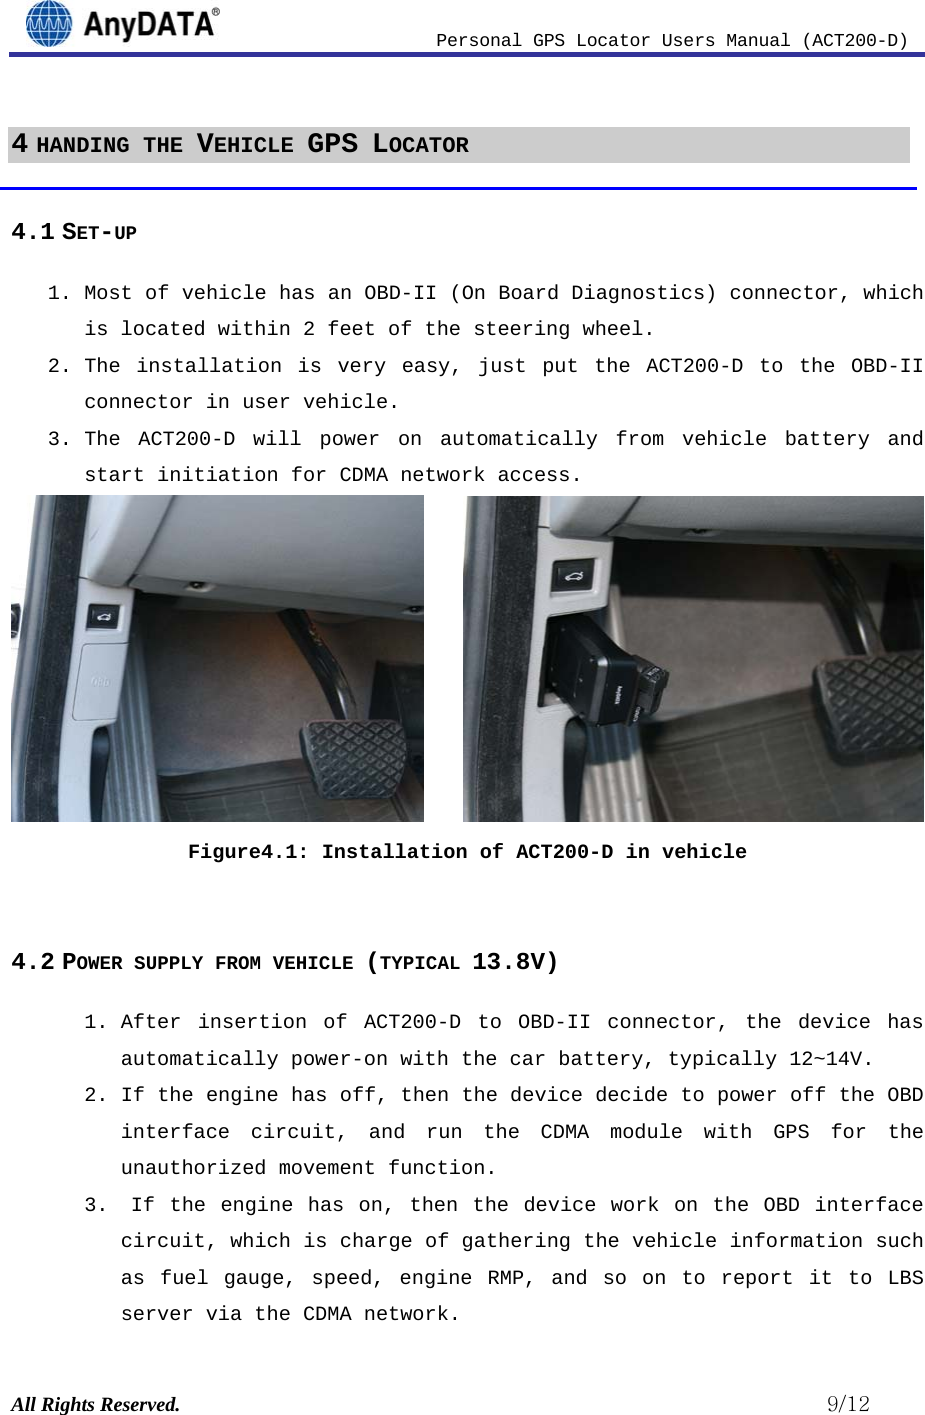                          Personal GPS Locator Users Manual (ACT200-D) All Rights Reserved.                                                          9/12 4 HANDING THE VEHICLE GPS LOCATOR  4.1 SET-UP 1. Most of vehicle has an OBD-II (On Board Diagnostics) connector, which is located within 2 feet of the steering wheel. 2. The installation is very easy, just put the ACT200-D to the OBD-II connector in user vehicle.  3. The ACT200-D will power on automatically from vehicle battery and start initiation for CDMA network access.        Figure4.1: Installation of ACT200-D in vehicle  4.2 POWER SUPPLY FROM VEHICLE (TYPICAL 13.8V) 1. After insertion of ACT200-D to OBD-II connector, the device has automatically power-on with the car battery, typically 12~14V. 2. If the engine has off, then the device decide to power off the OBD interface circuit, and run the CDMA module with GPS for the unauthorized movement function.  3.  If the engine has on, then the device work on the OBD interface circuit, which is charge of gathering the vehicle information such as fuel gauge, speed, engine RMP, and so on to report it to LBS server via the CDMA network. 